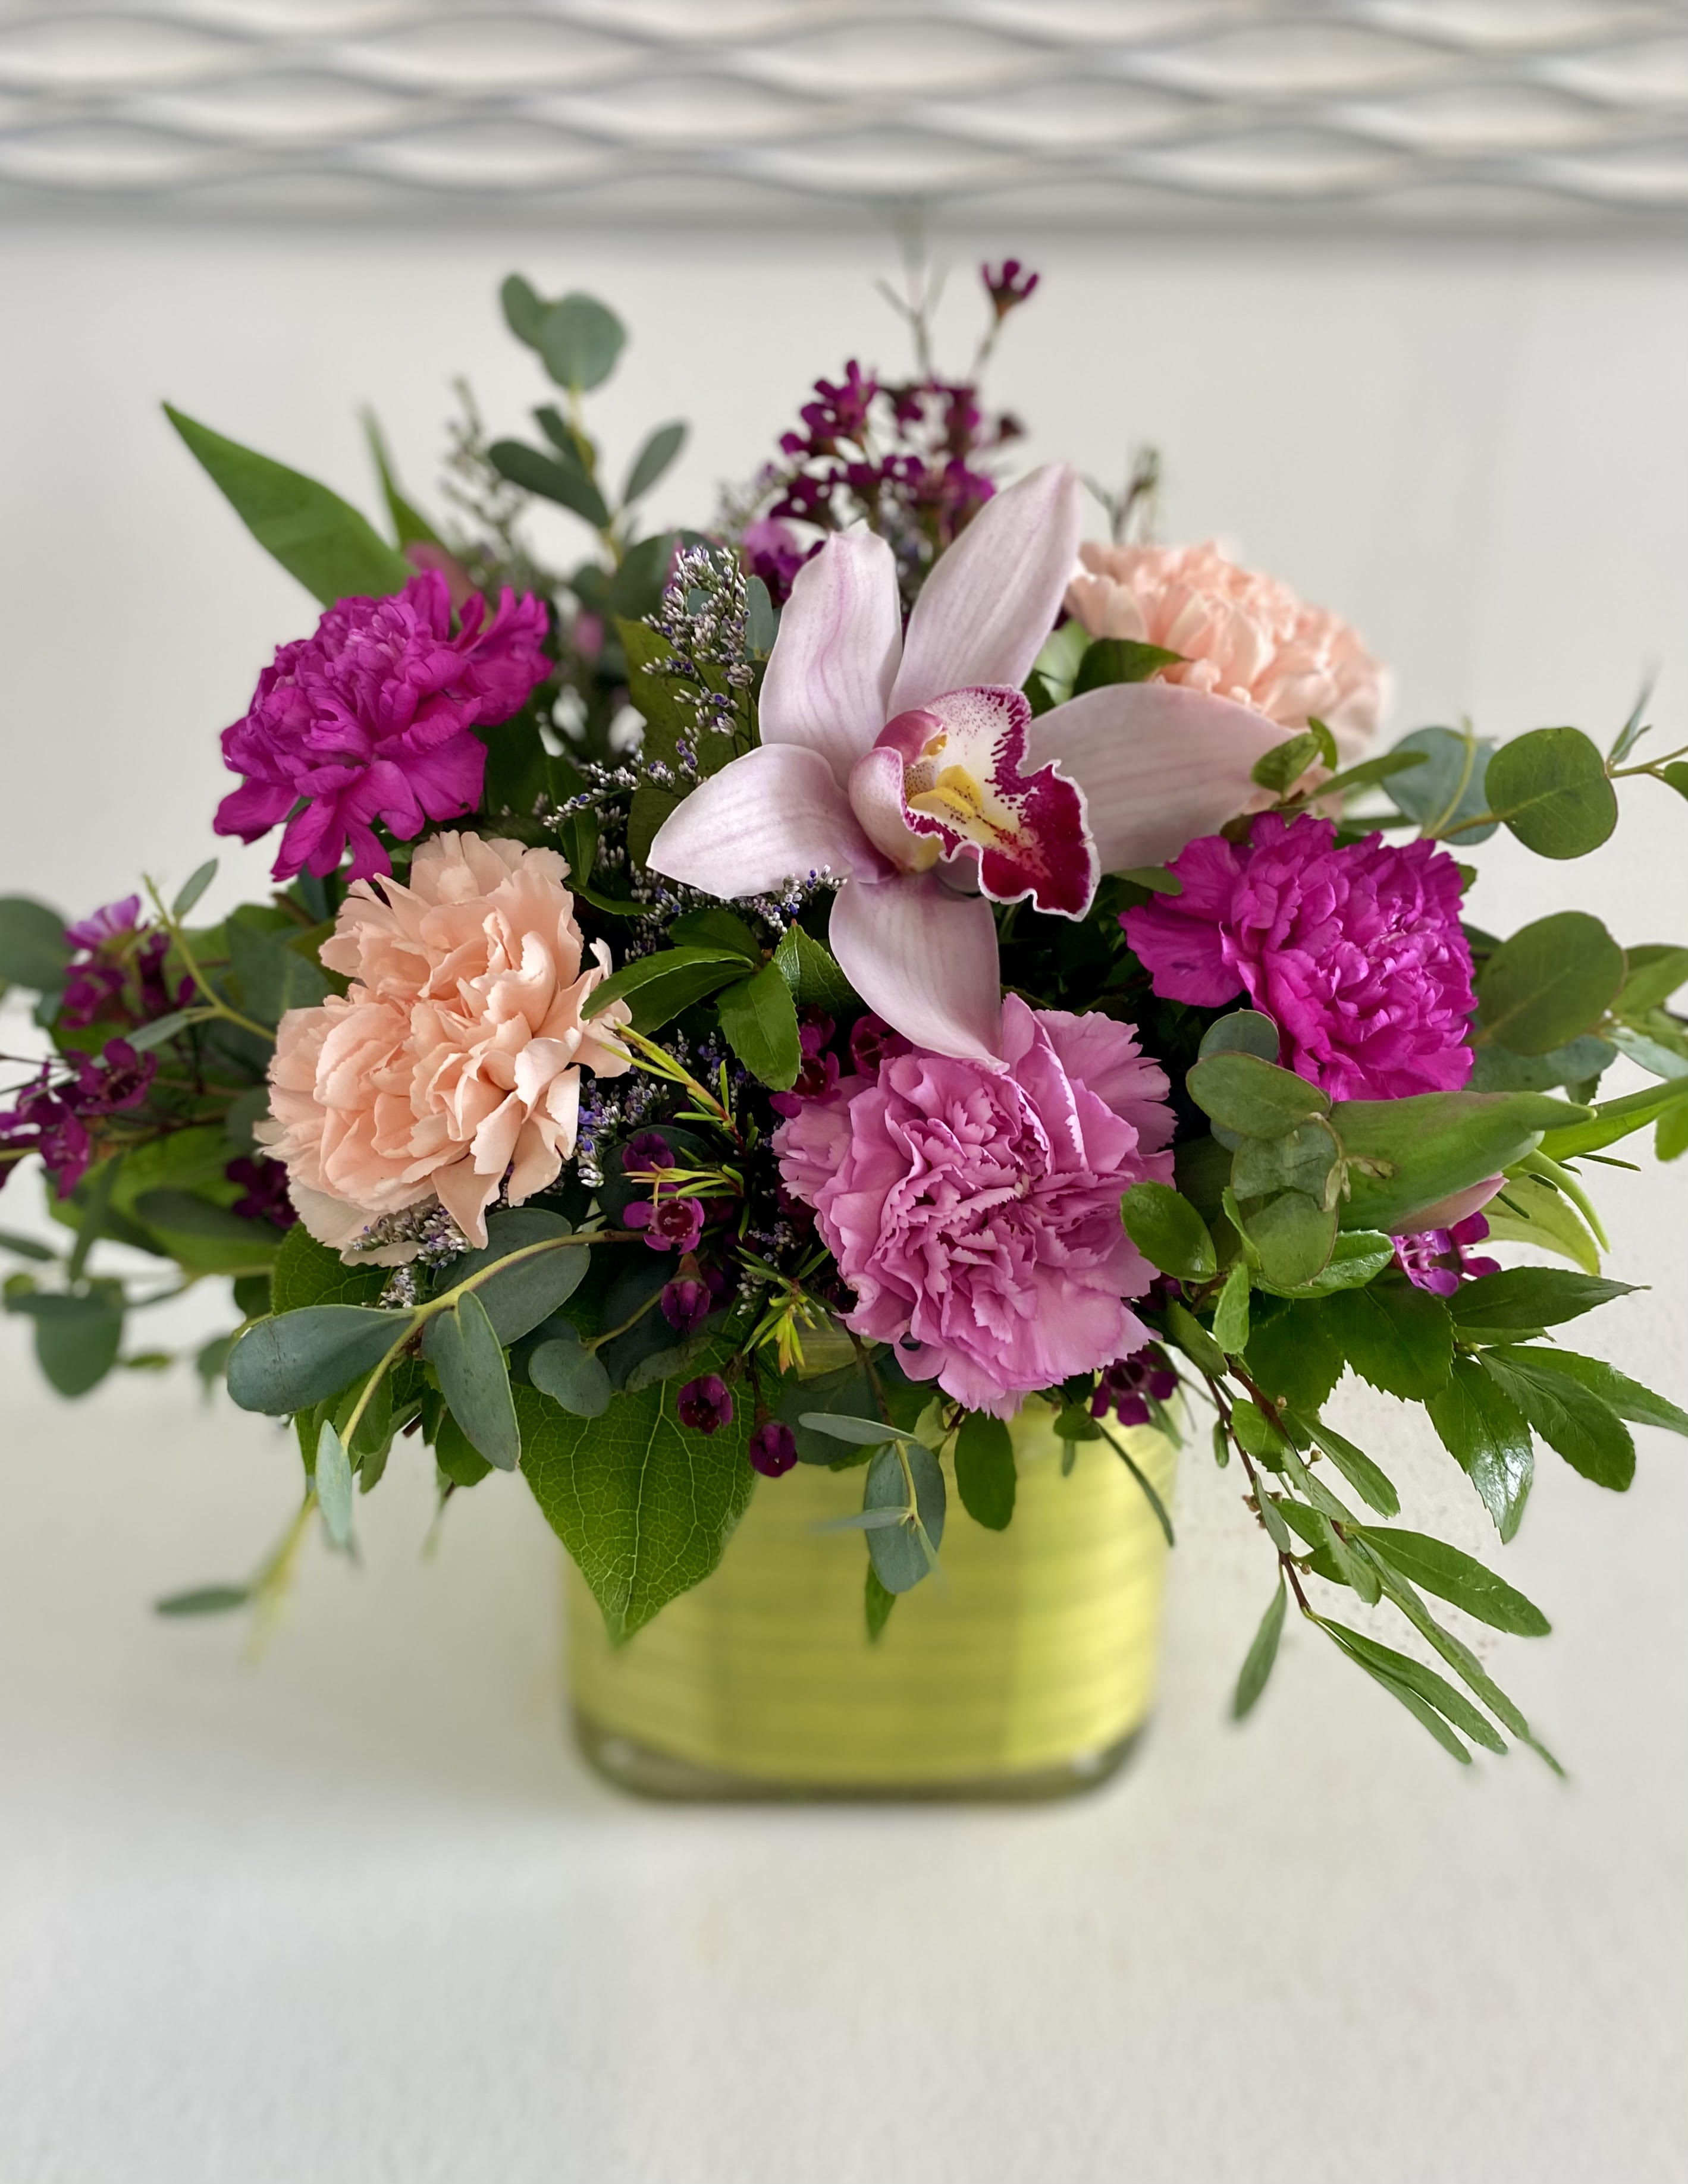 Pink Sherbet - A sweet blend of pink and peach carnations, cymbidium orchids, pink filler flower and fresh mixed greenery arranged into a glass vase.